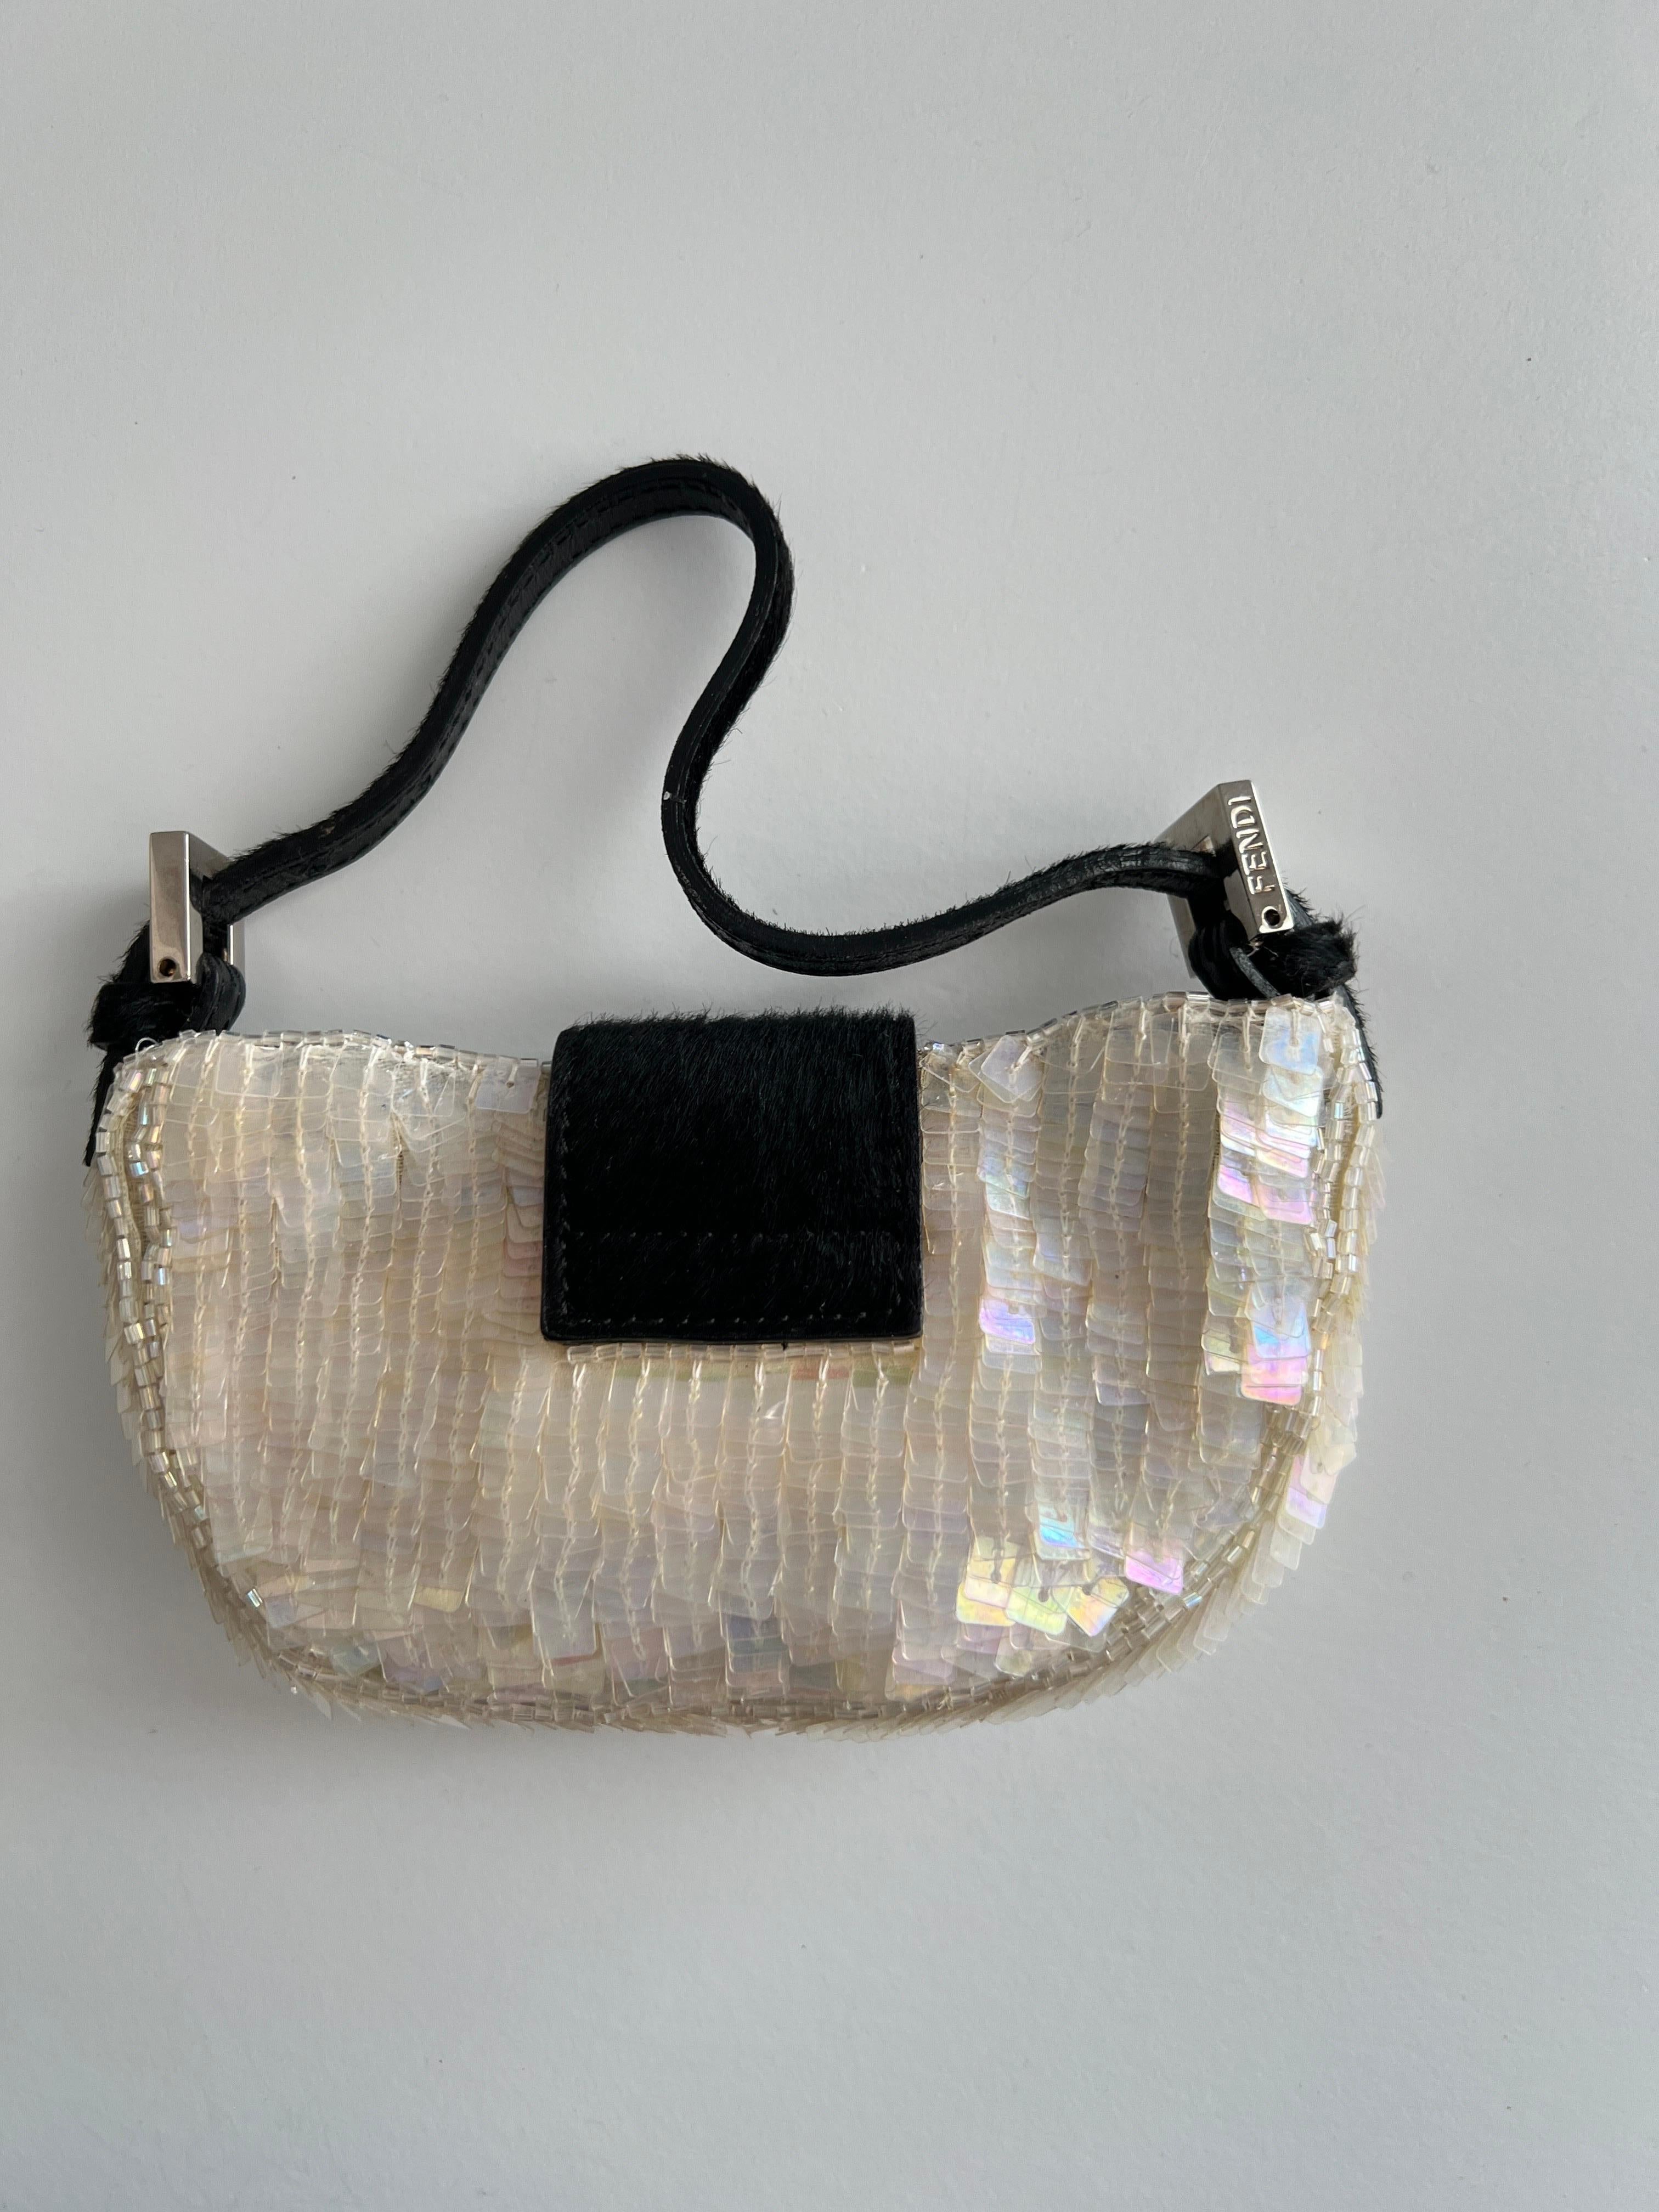 Very rare Vintage pearl sequin baguette
Trimmed black pony hair 
No stain on lining
Code not clear 
It's hard to find this style in such beautiful vintage condition
No noticeable stains or flaws
Iridescent pearl color sequin 
